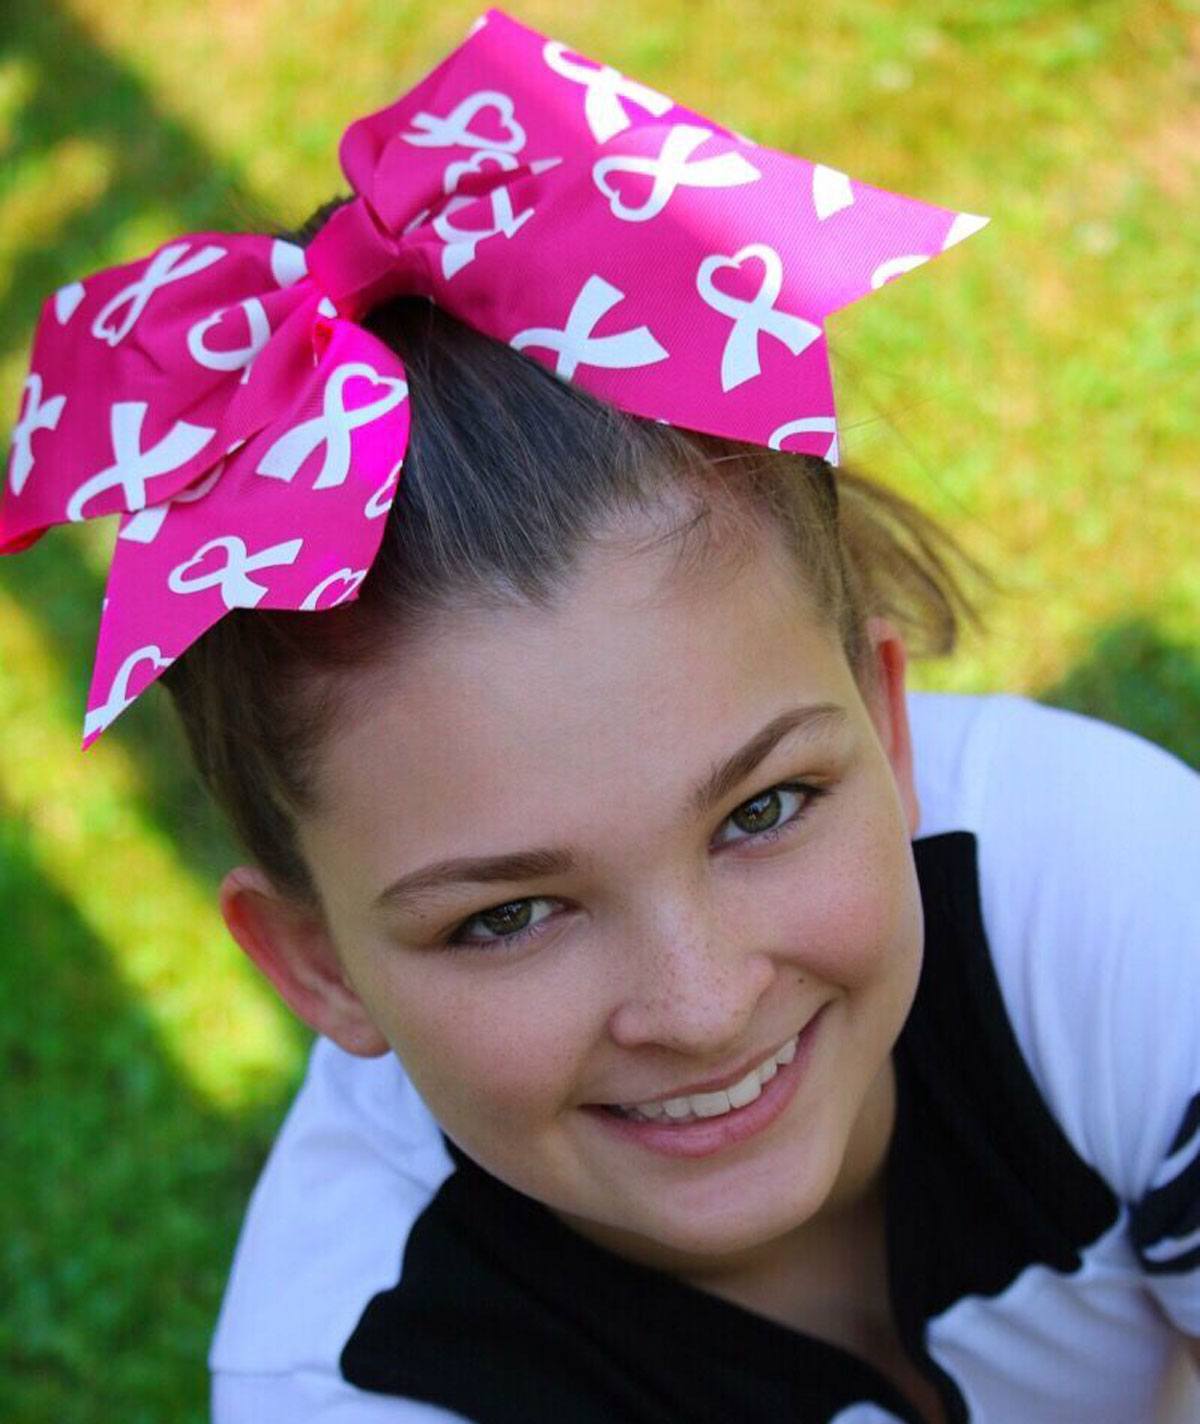 Breast Cancer awareness customizable cheer Bow